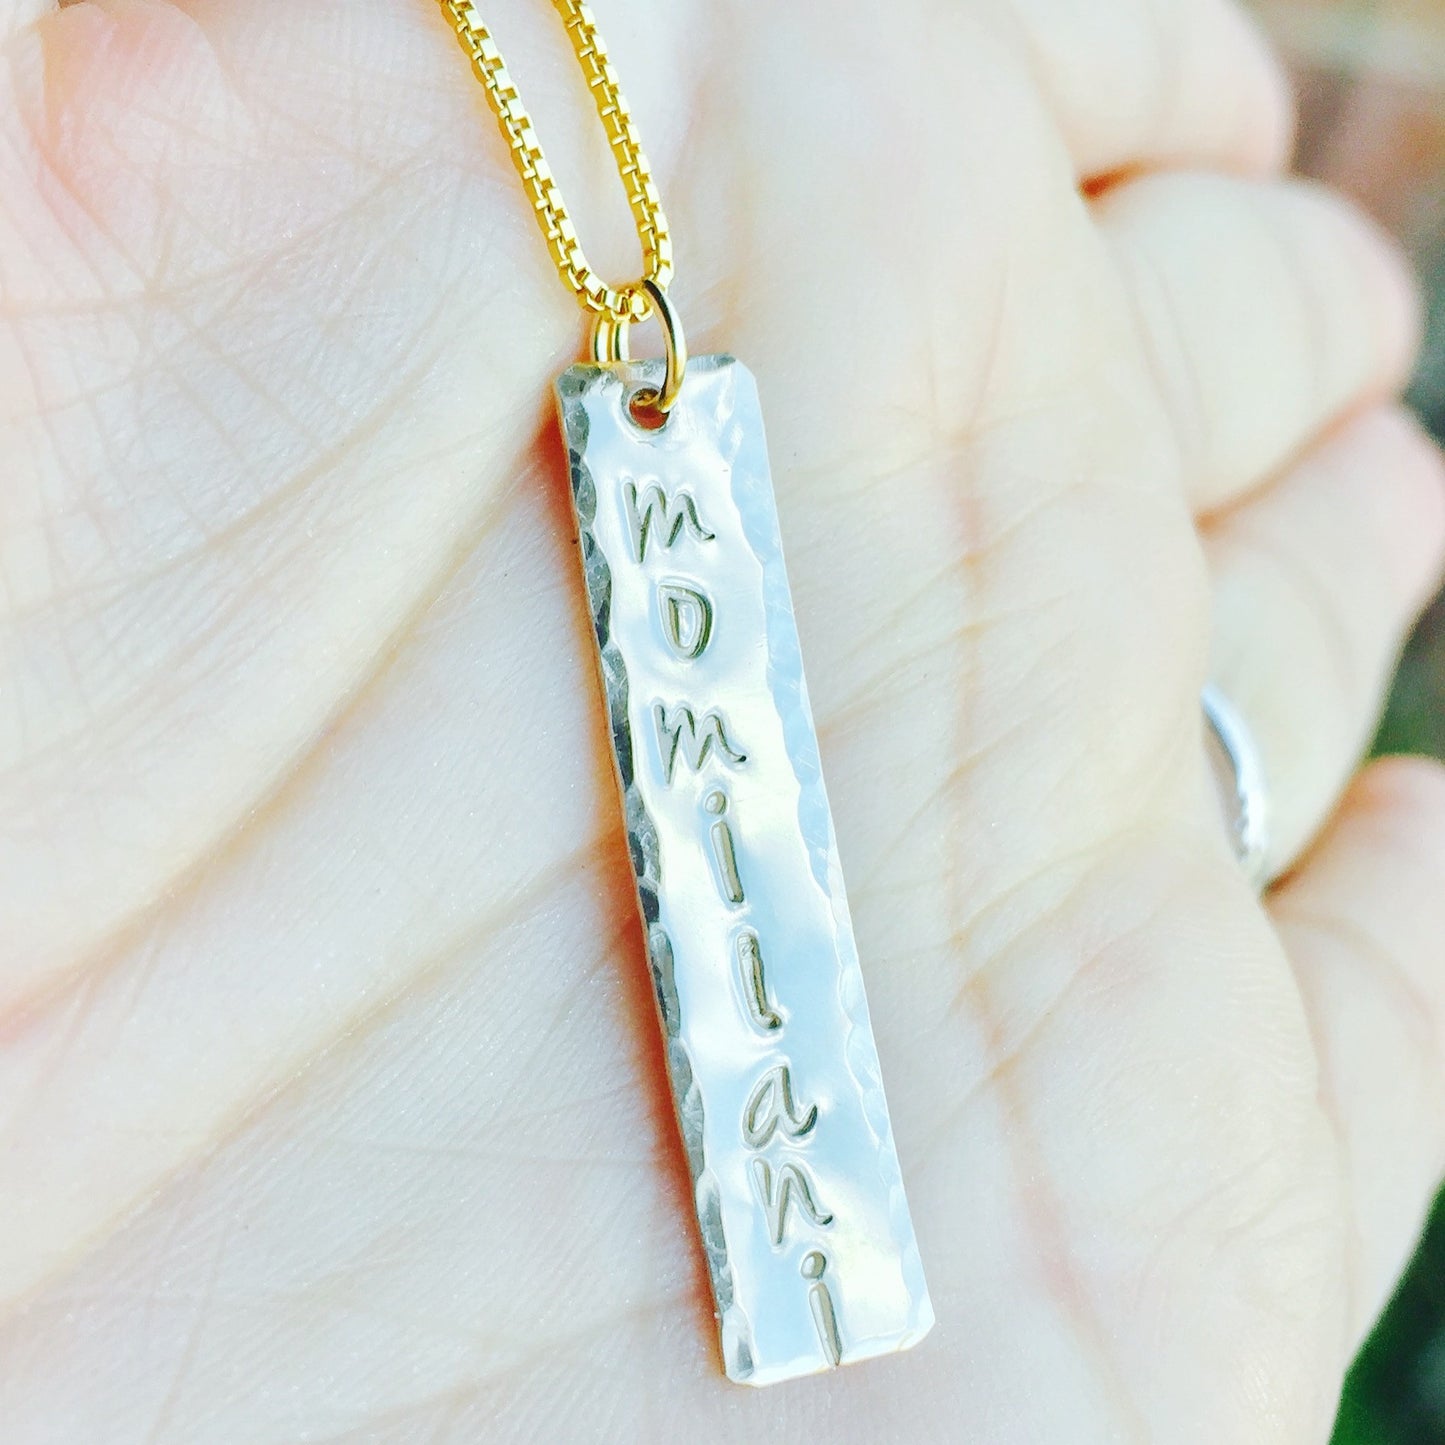 Hawaiian Name Necklace, Gold Bar Necklace - Natashaaloha, jewelry, bracelets, necklace, keychains, fishing lures, gifts for men, charms, personalized, 